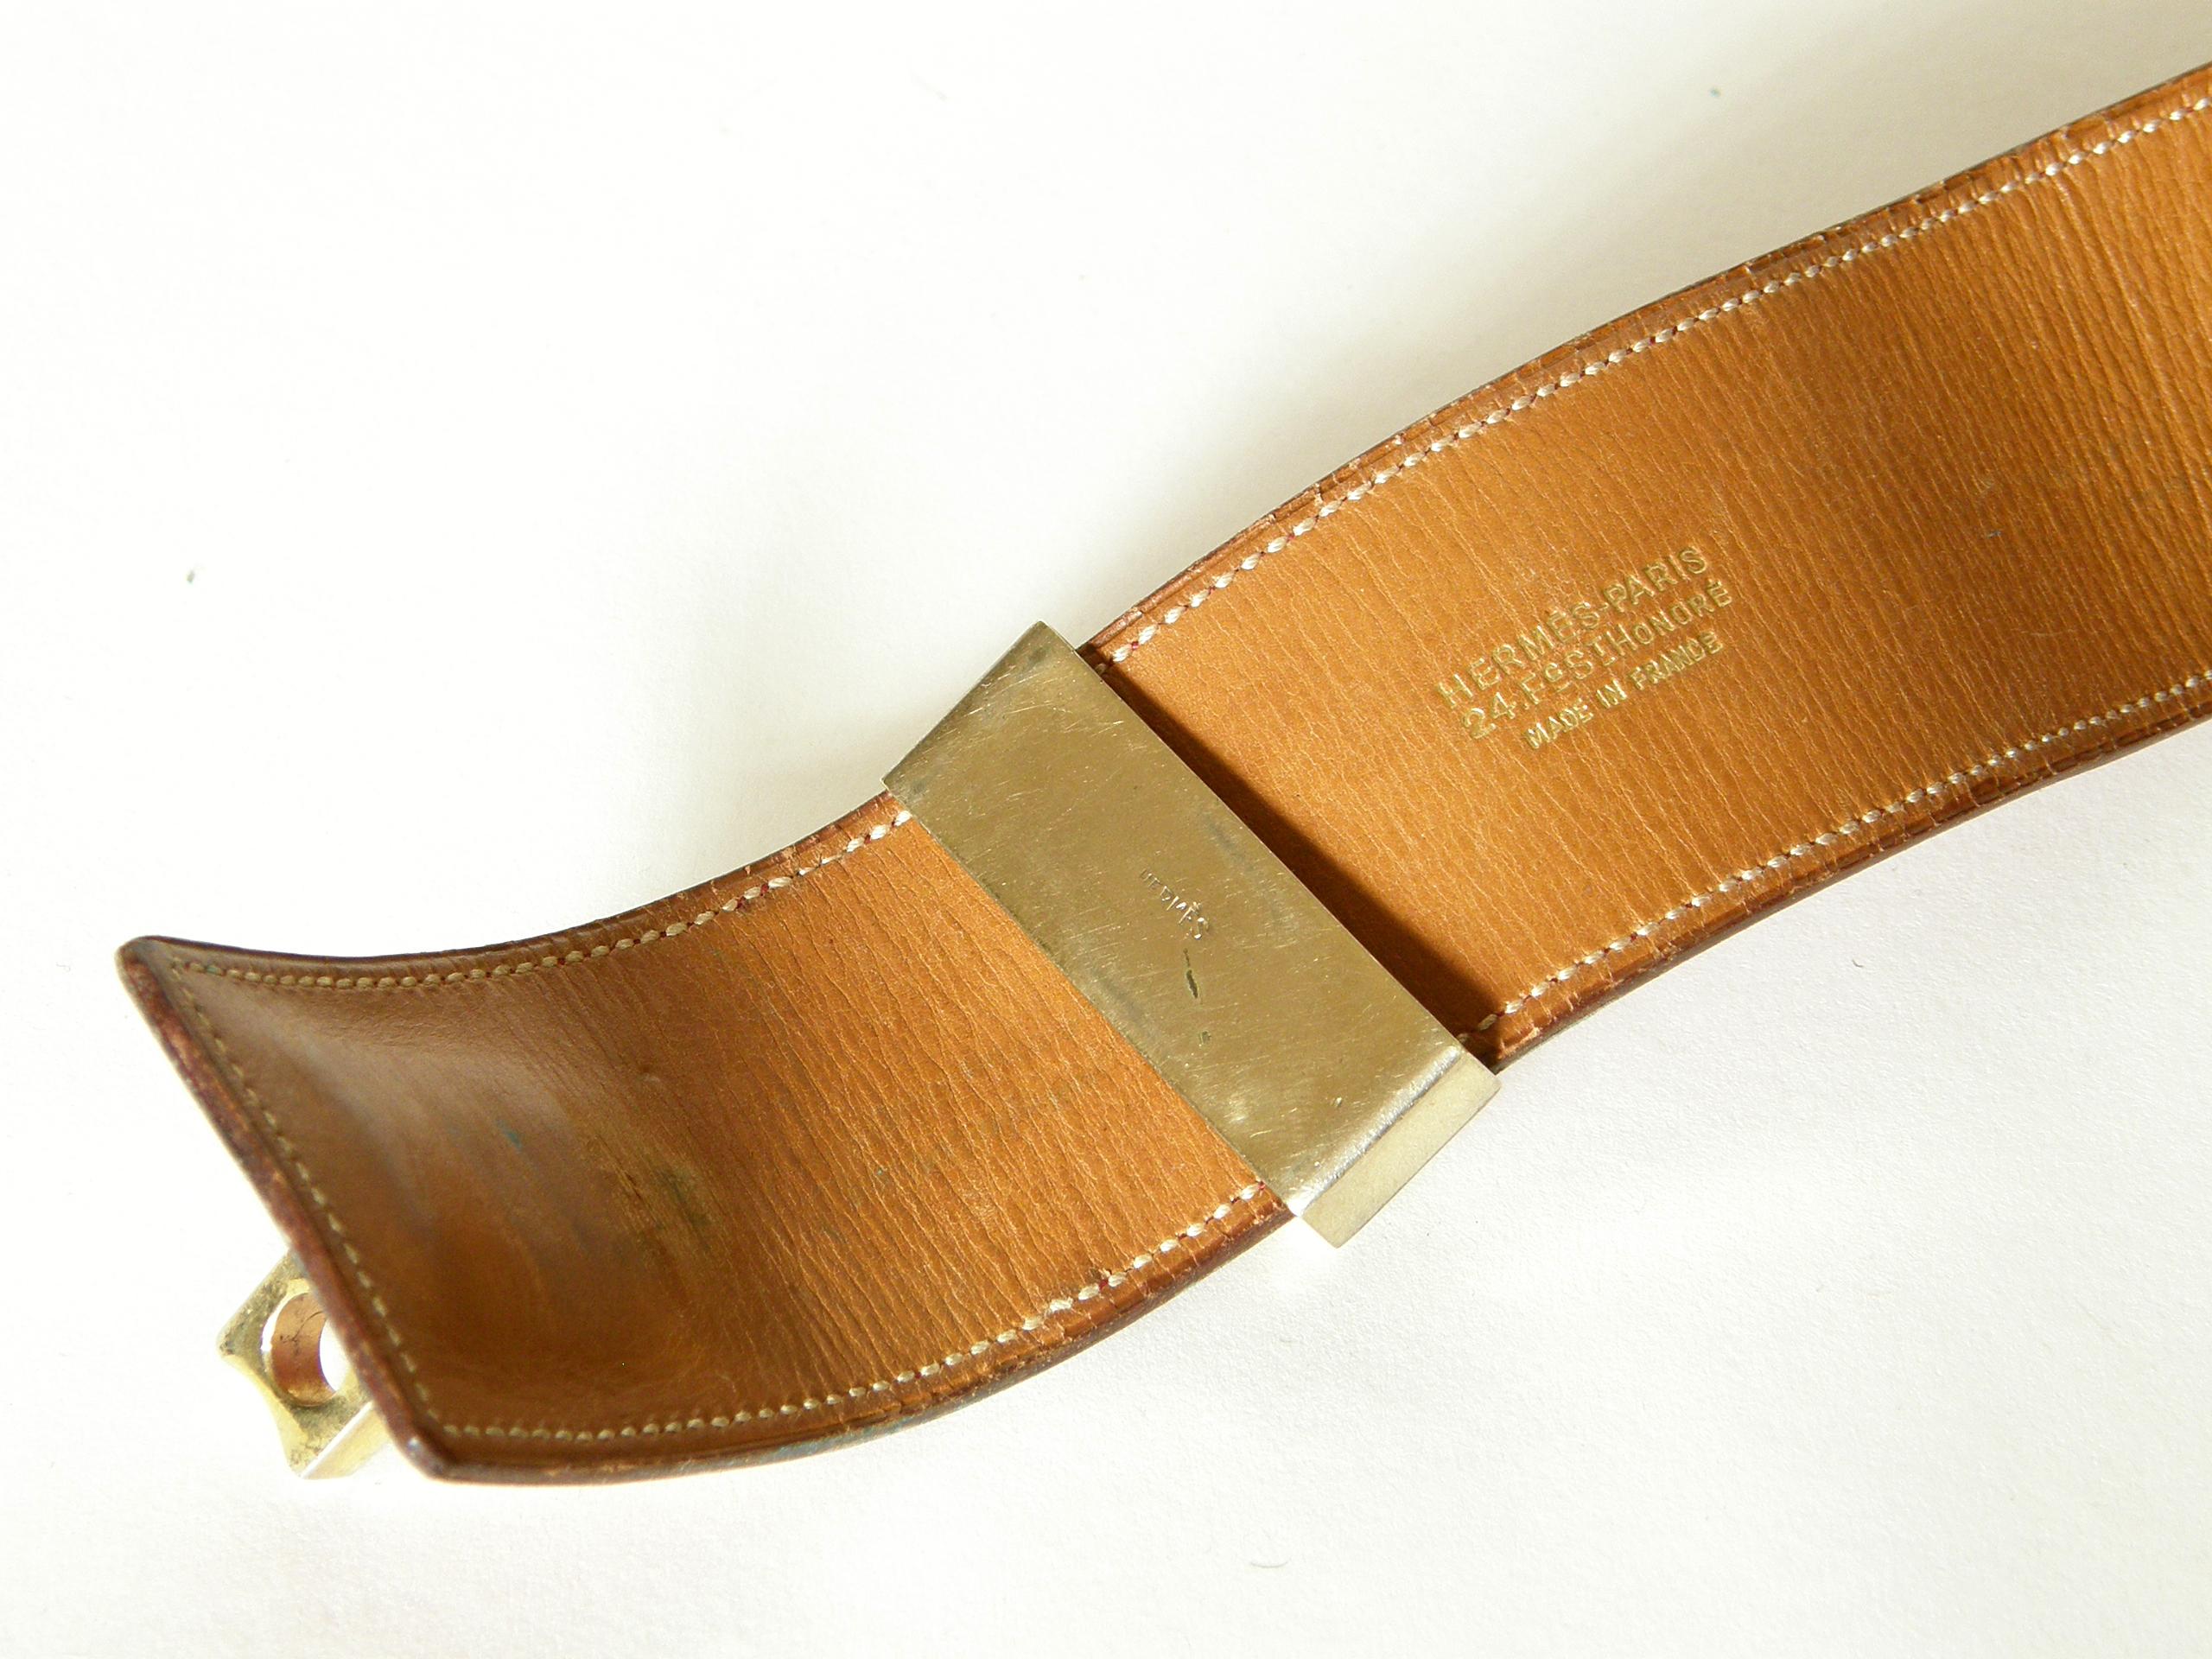 Early Hermès Collier de Chien Belt Adjustable Red Leather CDC with Gold Hardware 1